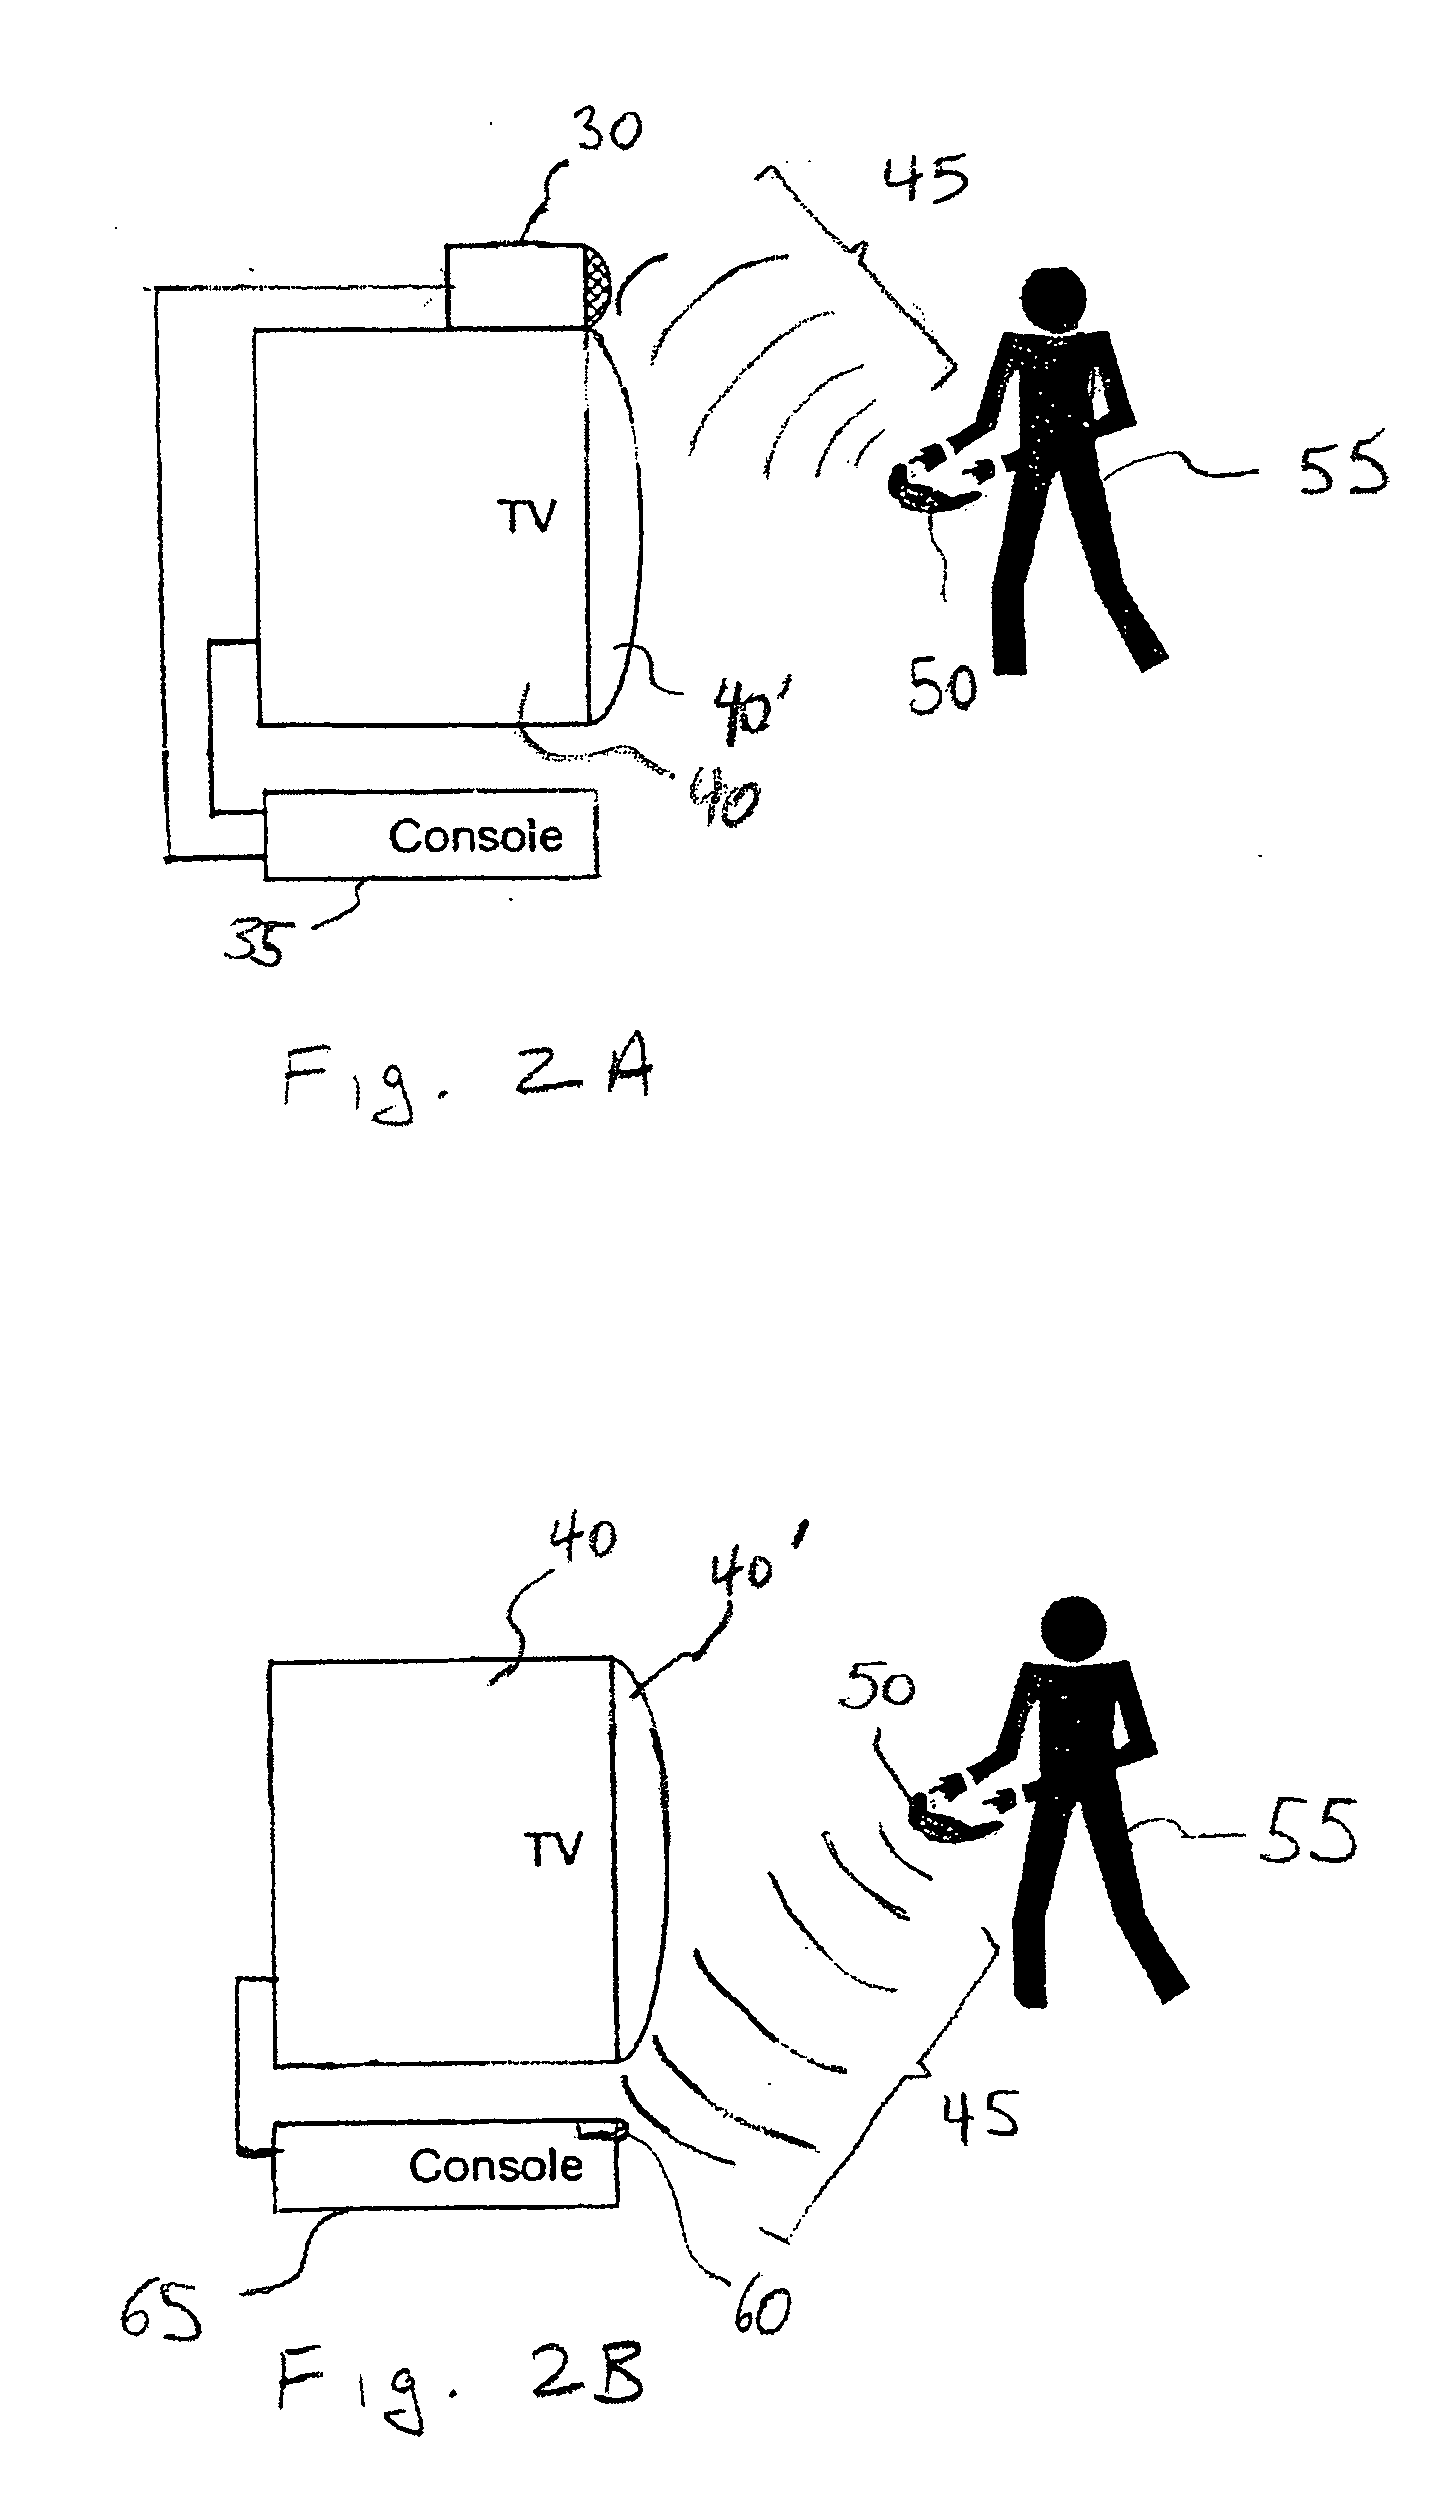 System and method for control by audible device